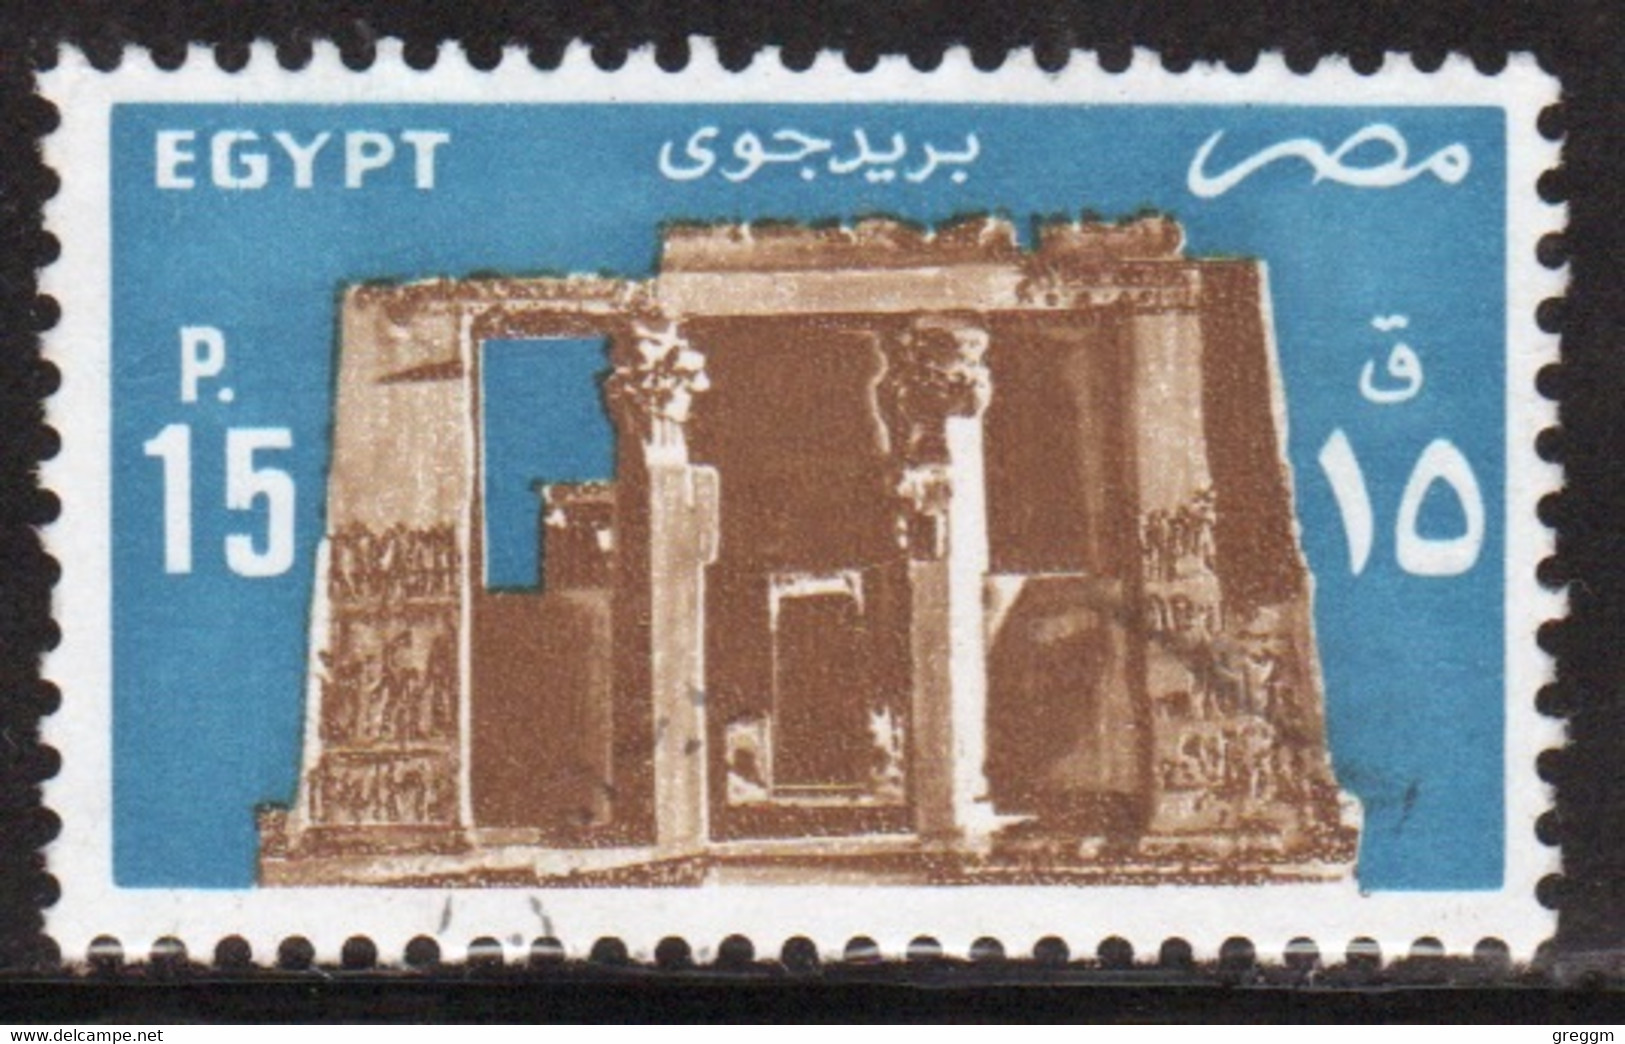 Egypt UAR 1985 Single 15p Stamp Issued To Celebrate Air Mail In Fine Used - Used Stamps